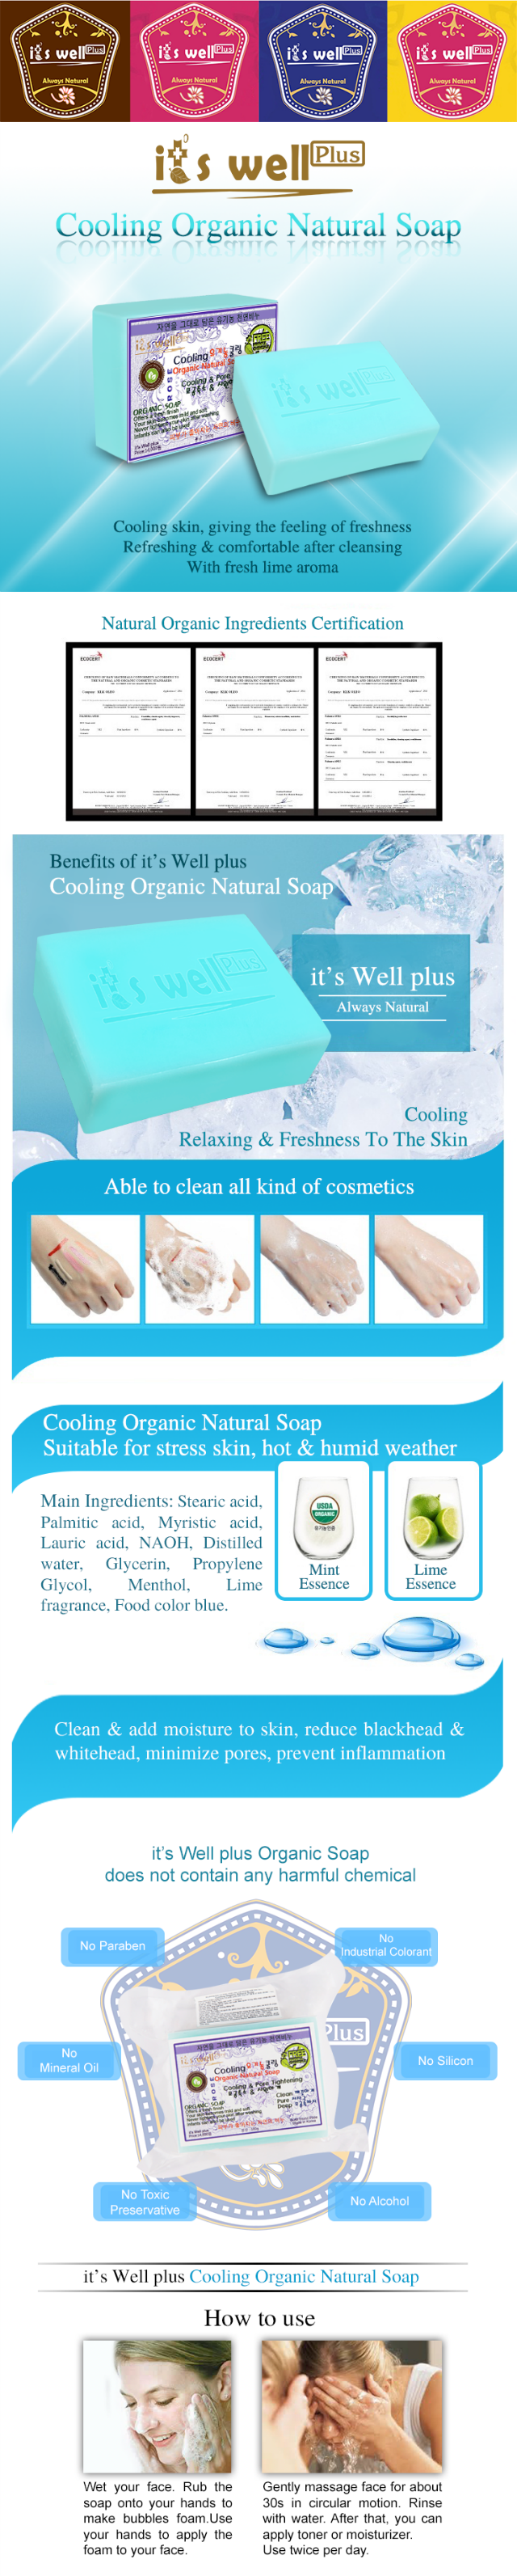 orgainic-soap-Cooling-eng.png